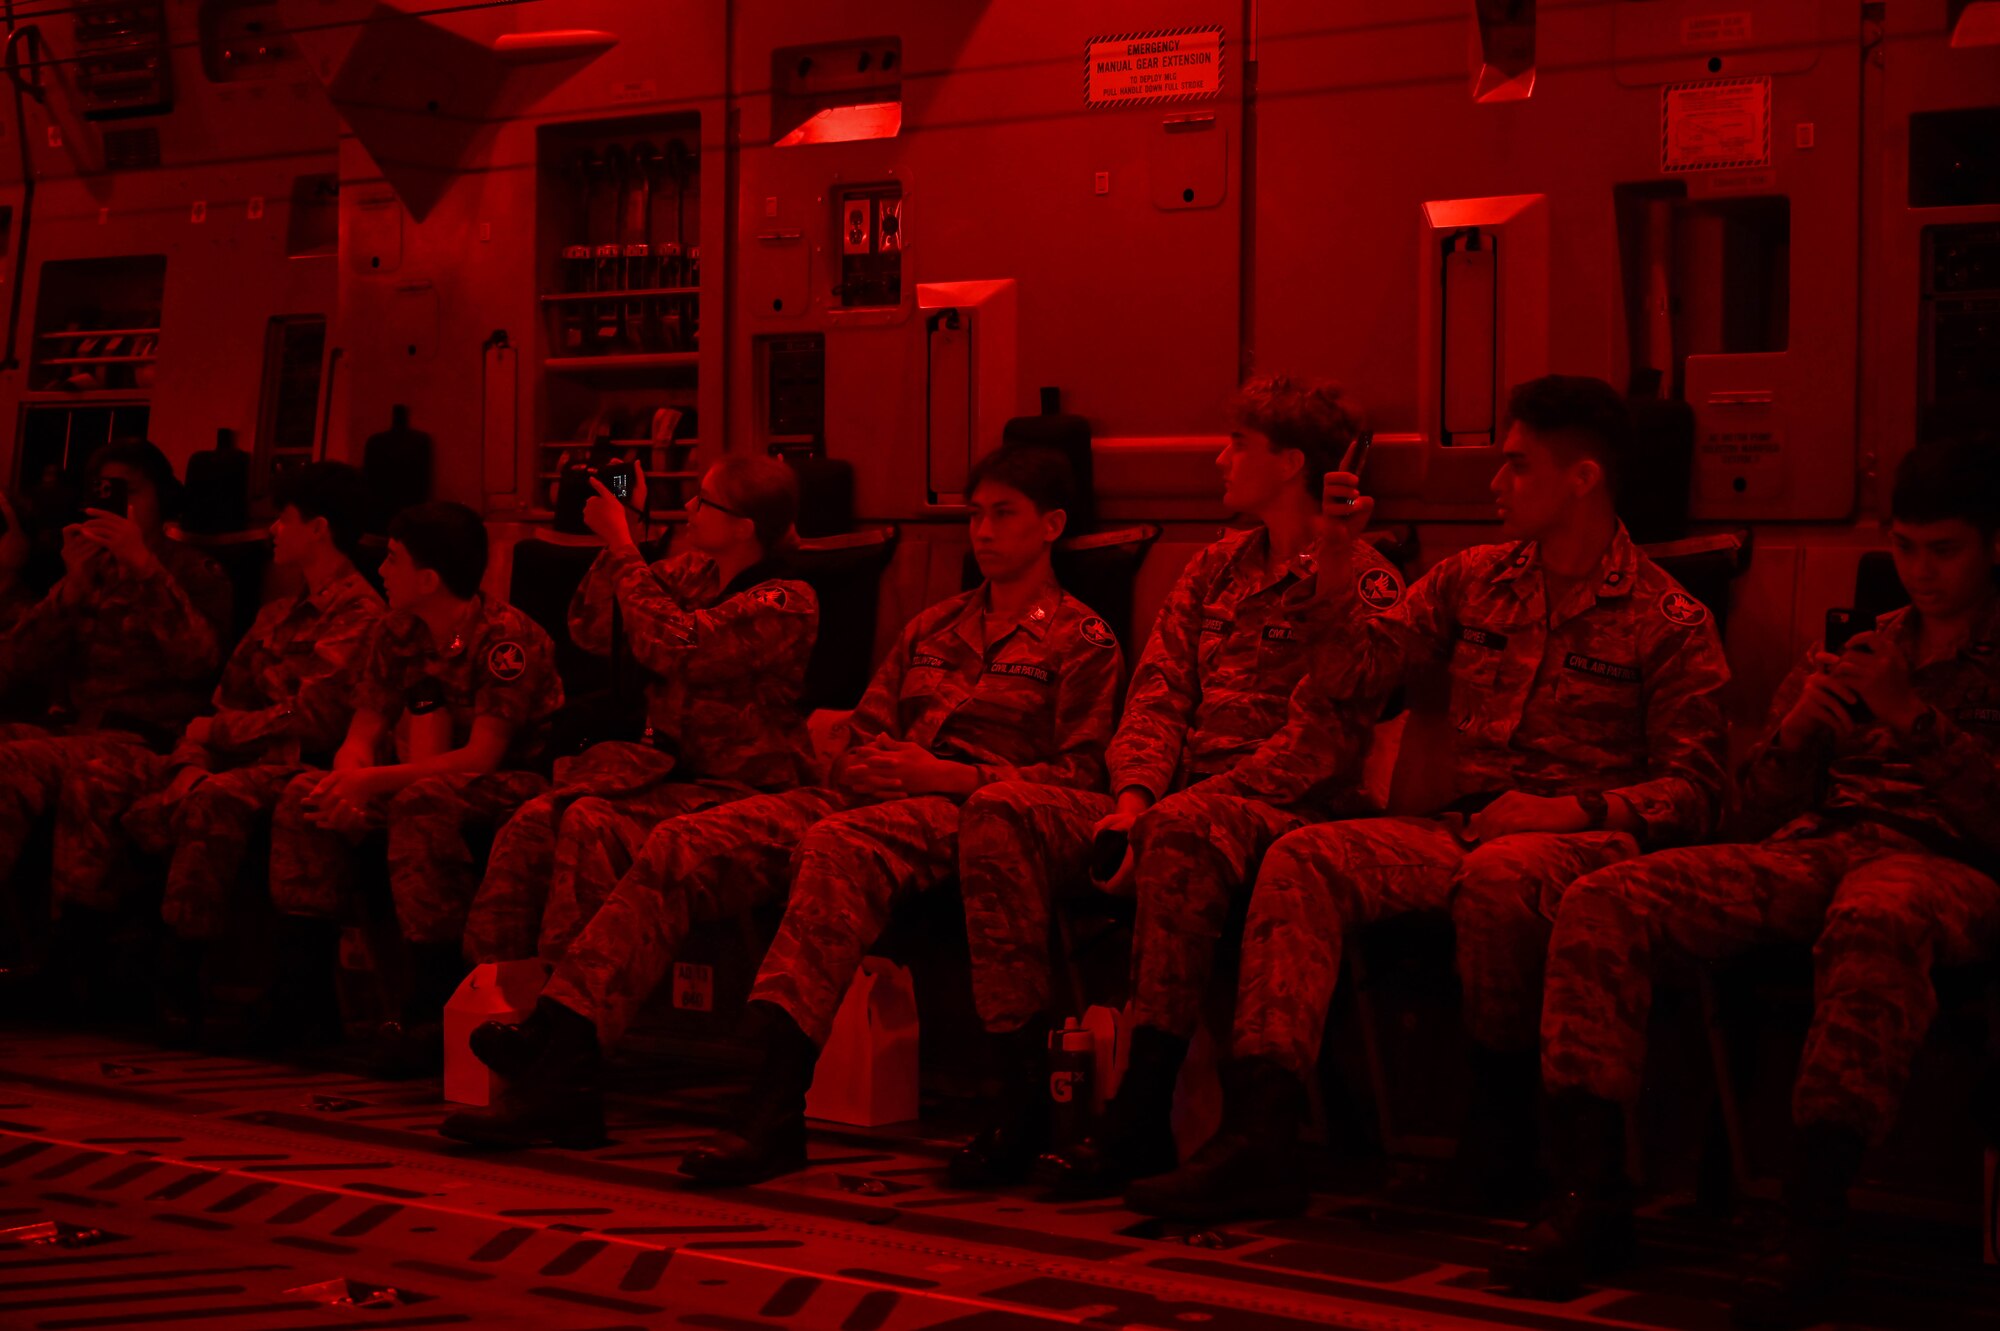 Kids sit during a flight with red lights on.